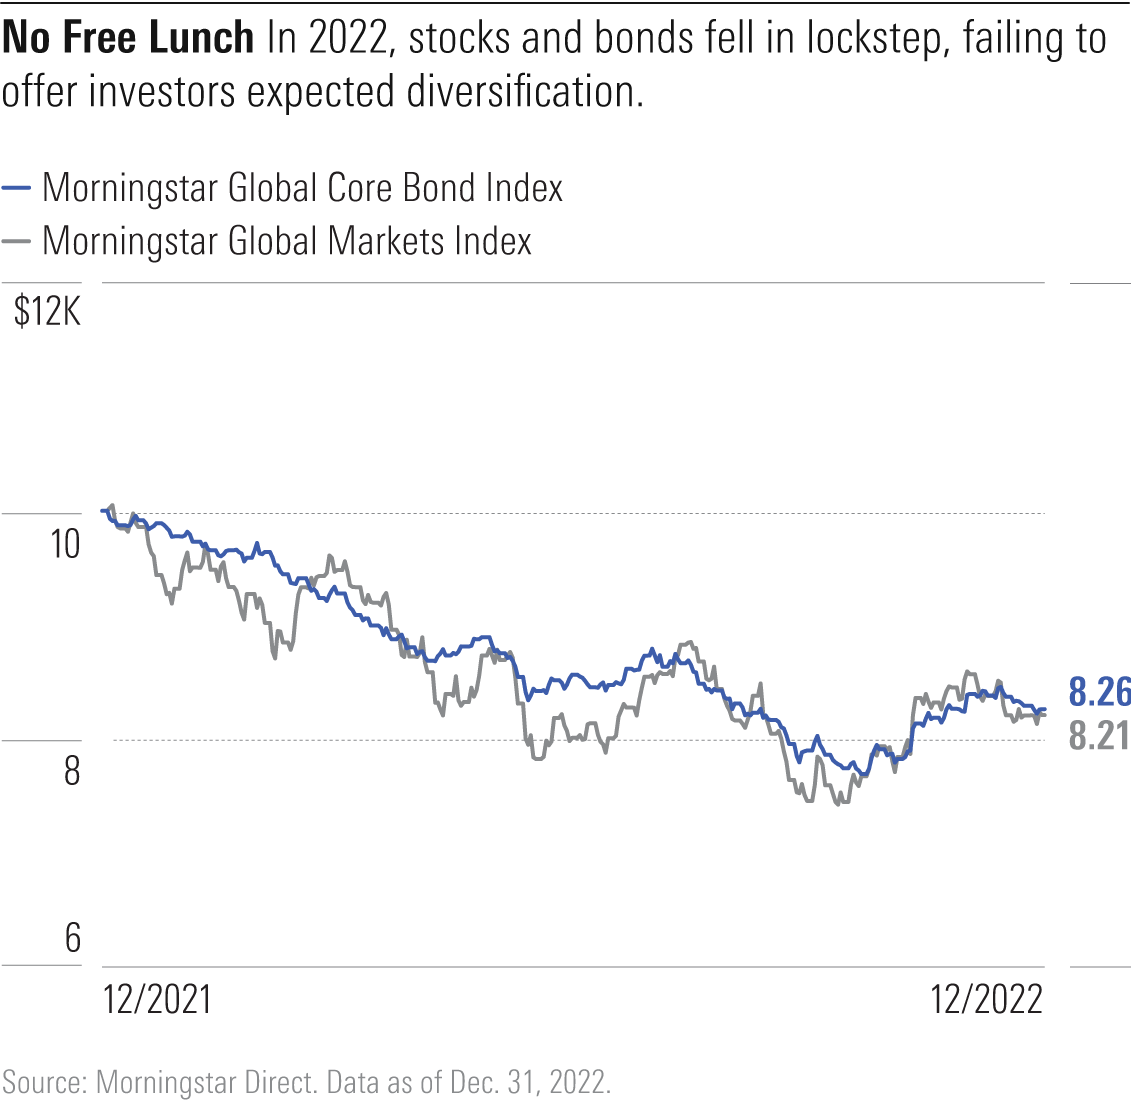 Line chart shows stocks and bonds declining in lockstep in 2022.